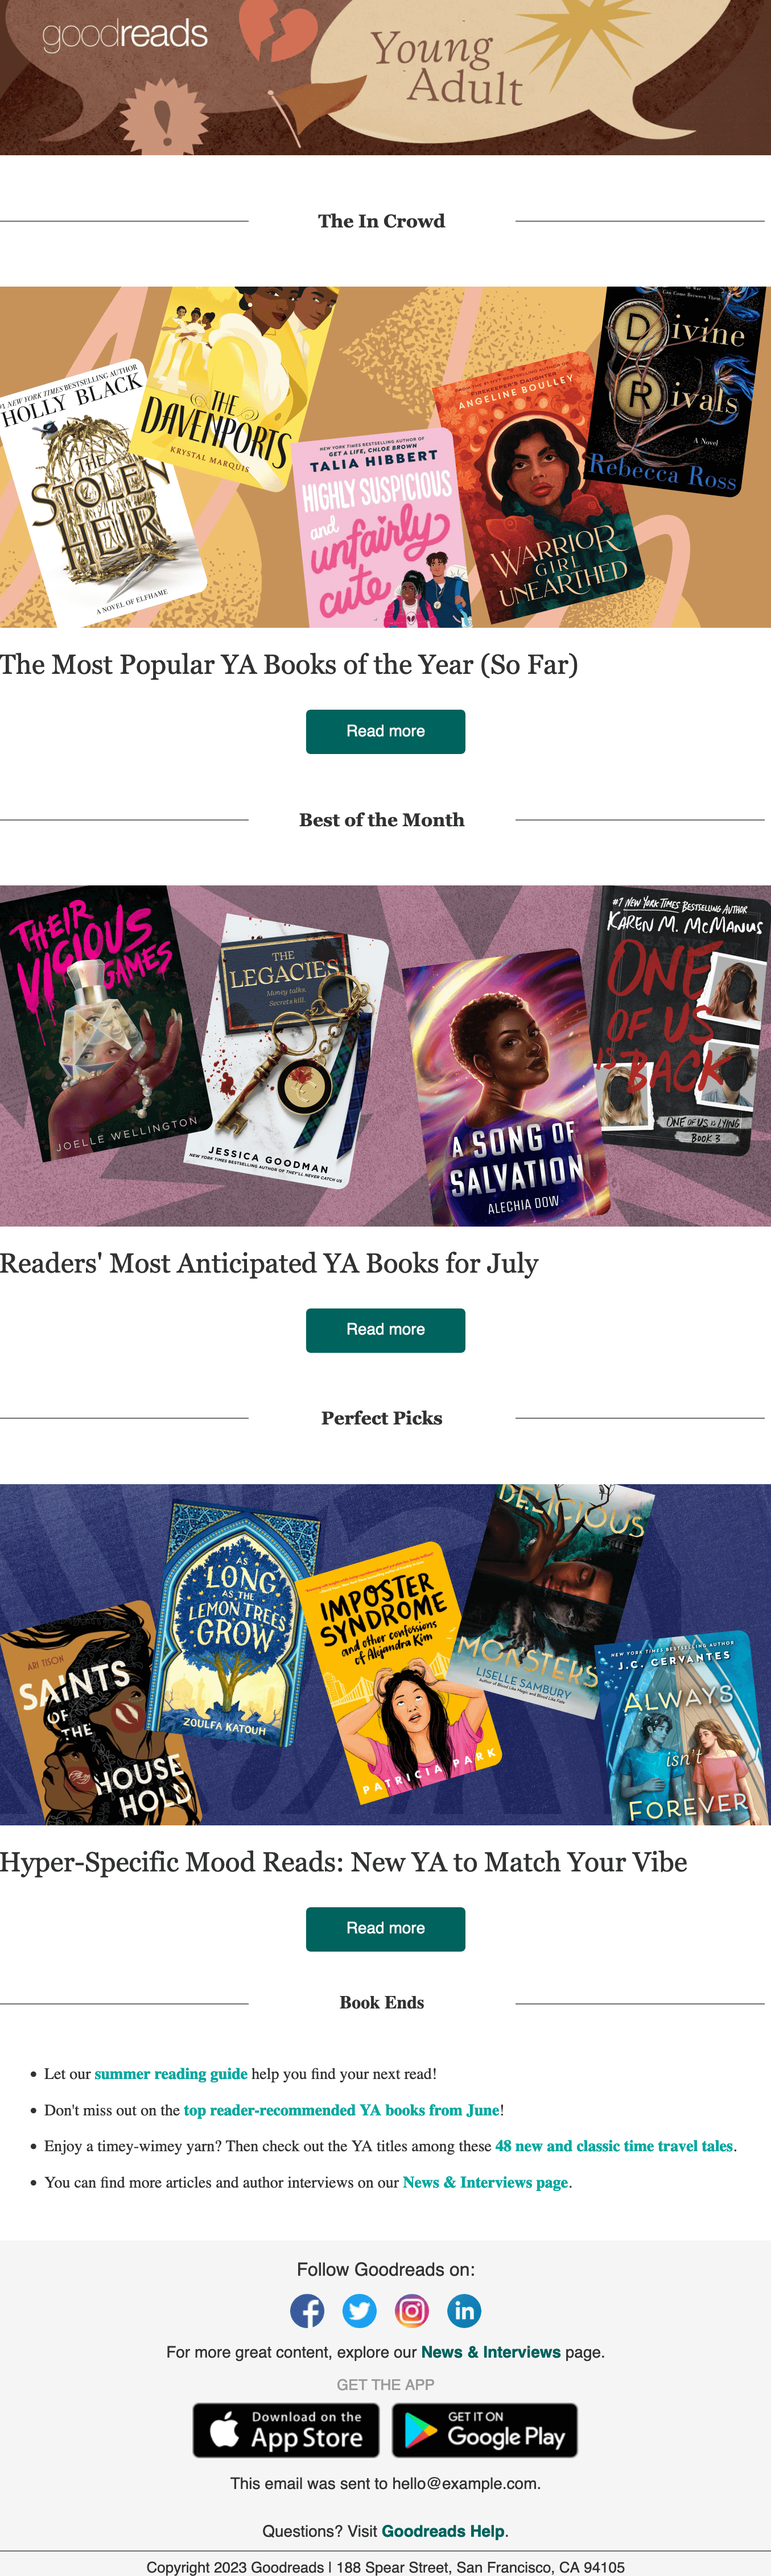 A Goodreads email with YA book recommendations